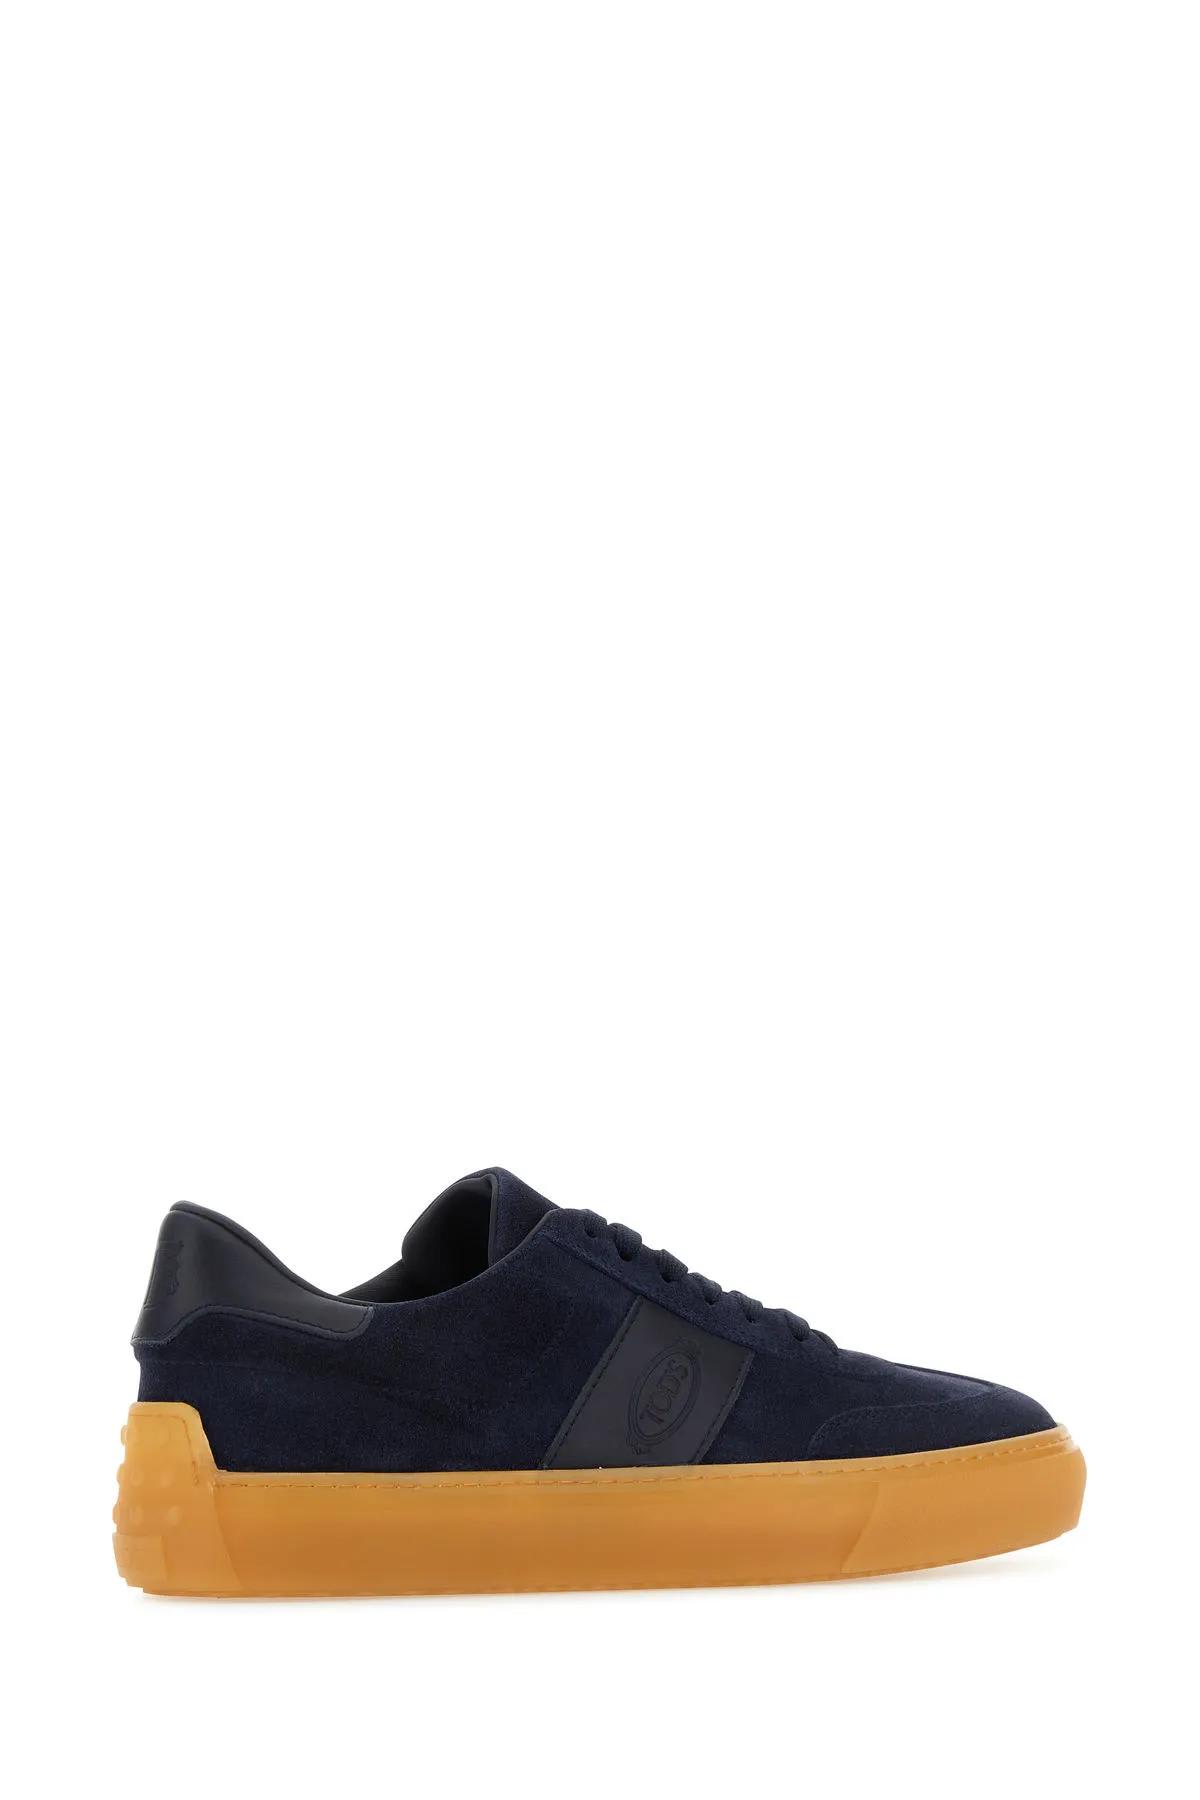 Shop Tod's Navy Blue Suede Sneakers